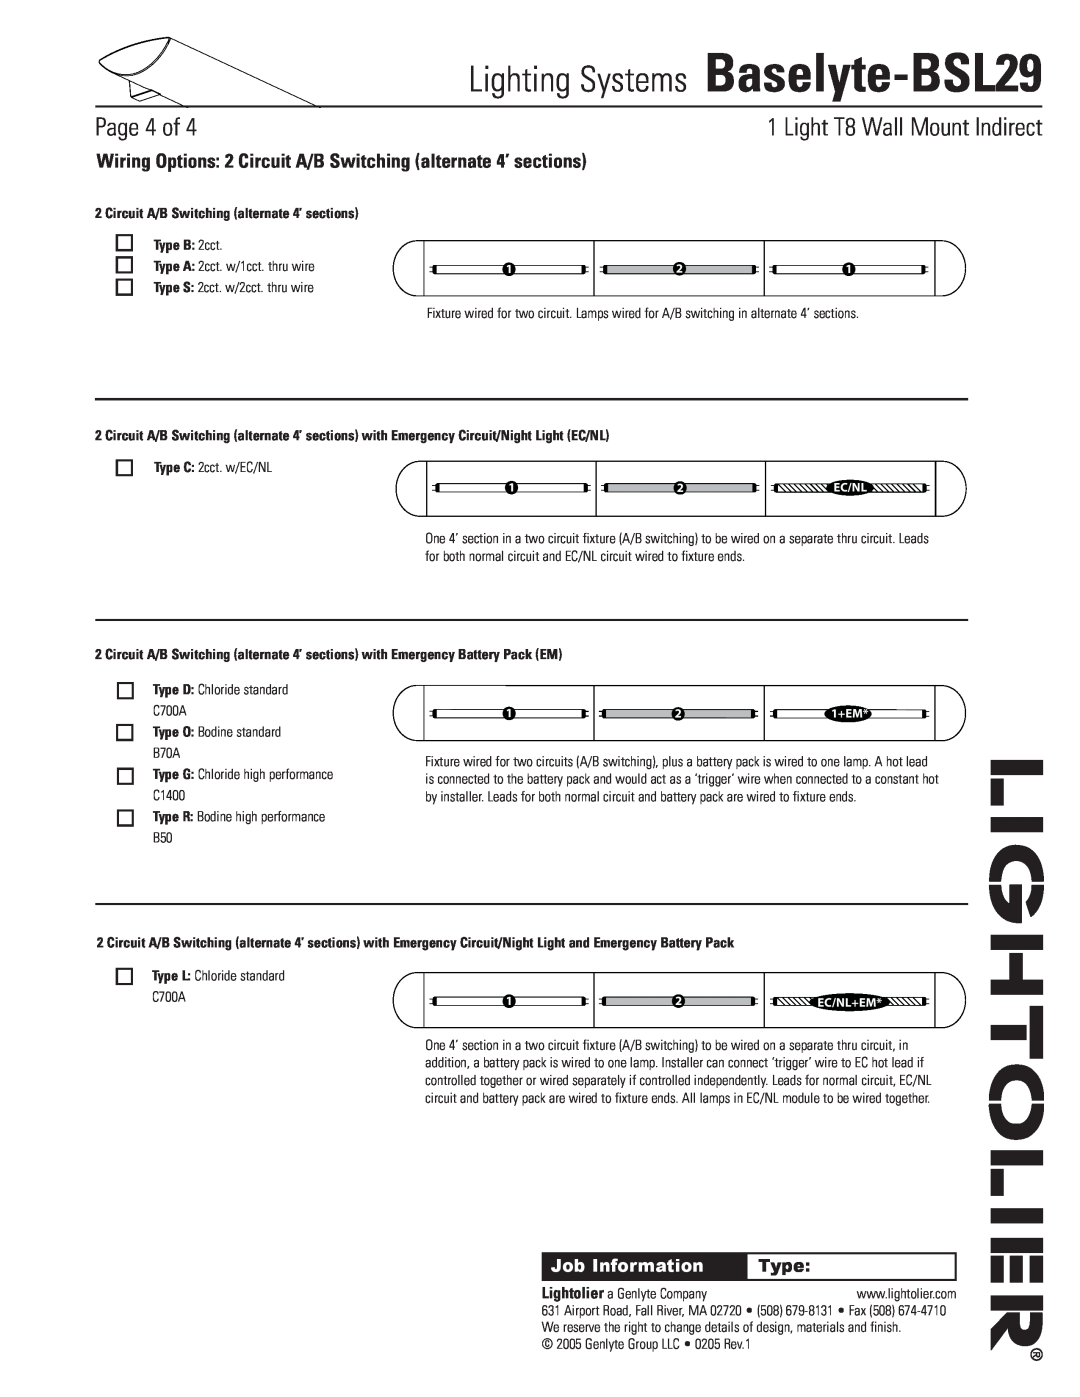 Lightolier Baselyte-BSL29 Circuit A/B Switching alternate 4’ sections, Type B 2cct, Type O Bodine standard B70A, Page of 